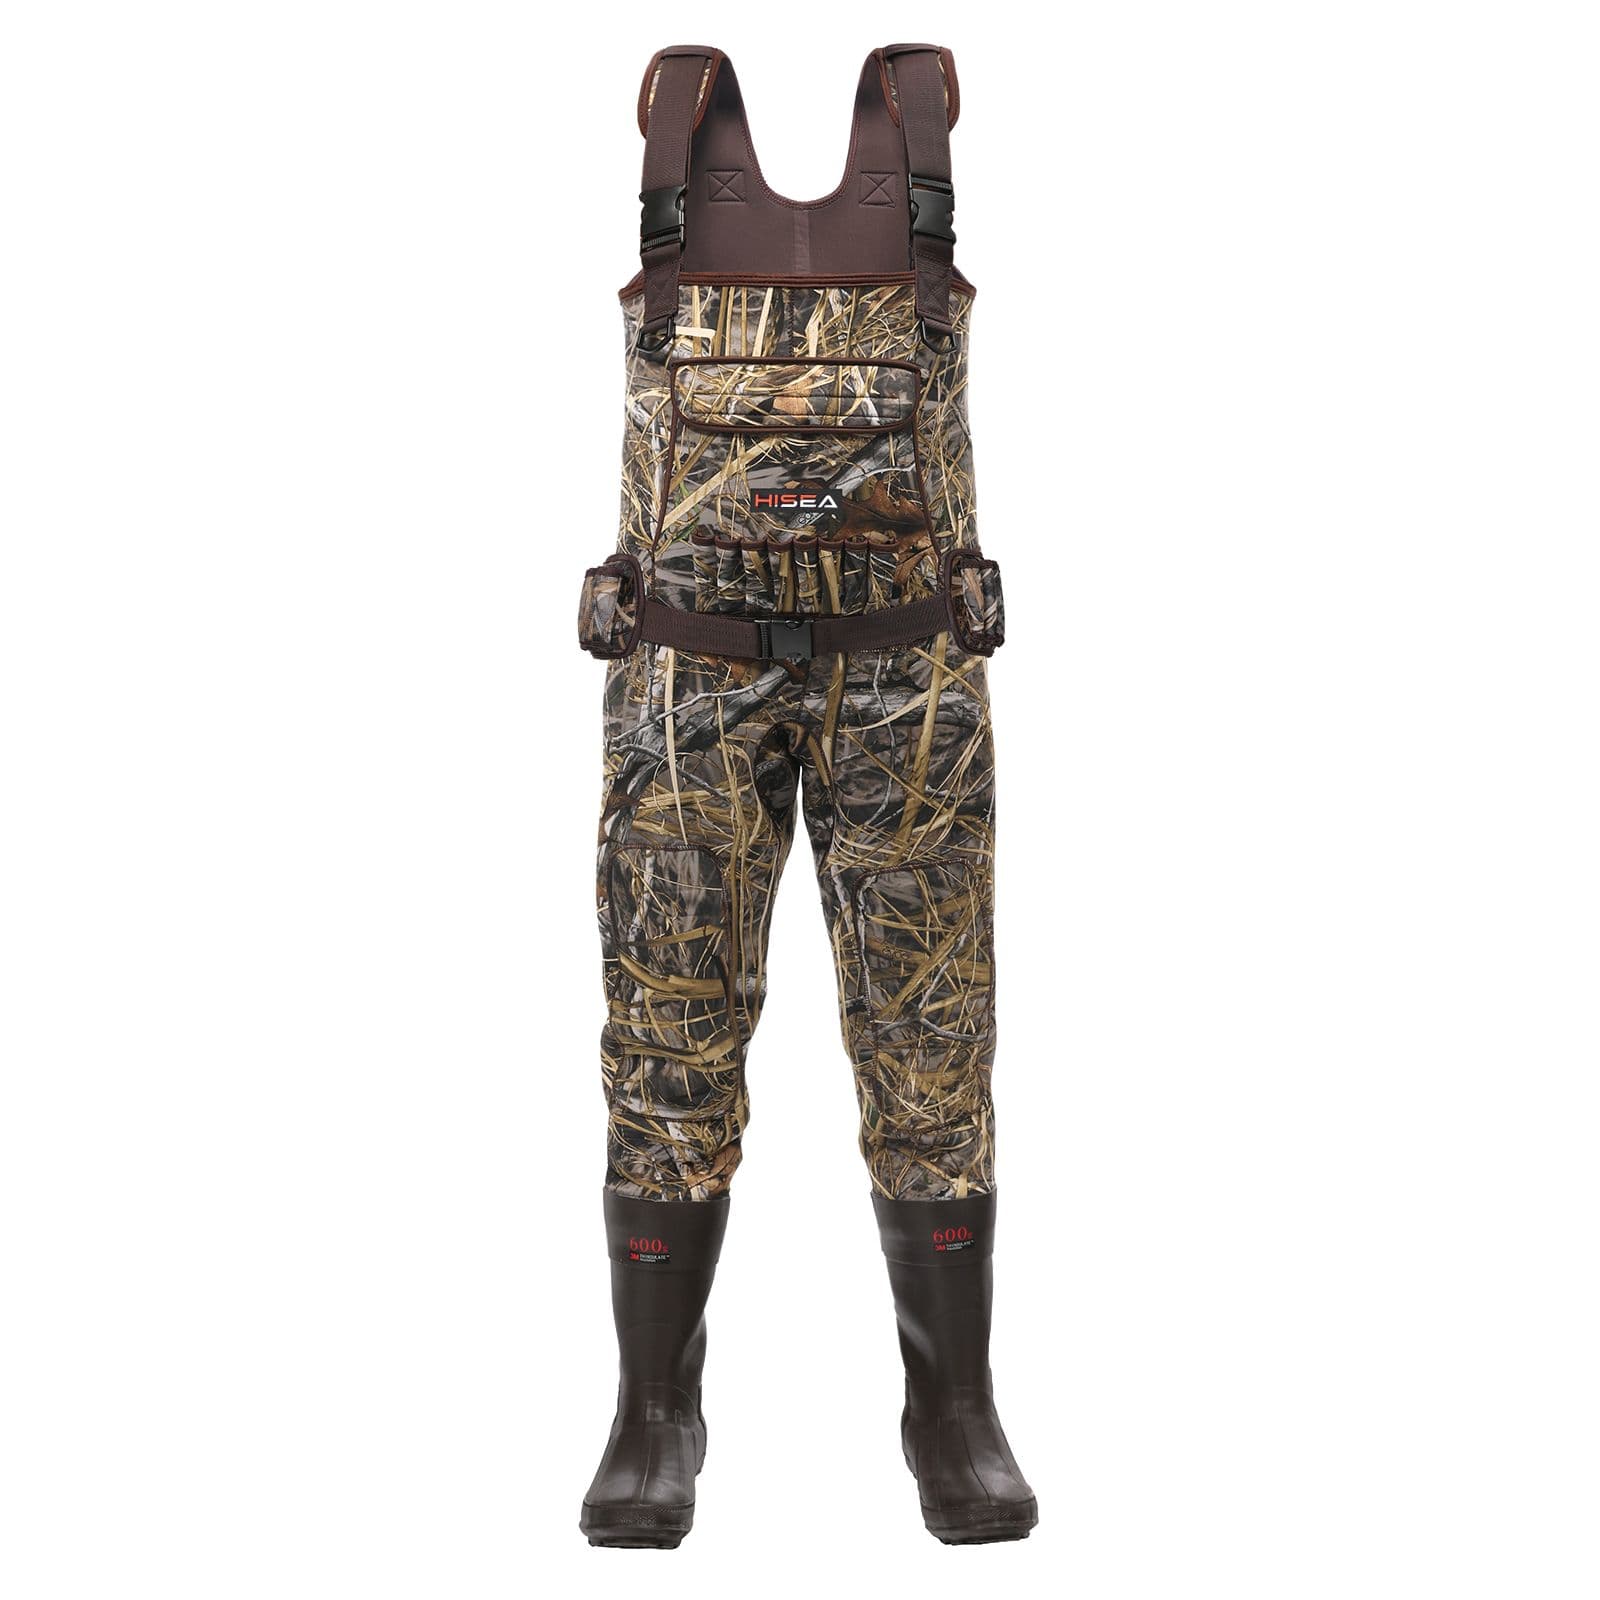 Fishingsir Hisea Fishing Waders For Men With Boots Womens Chest